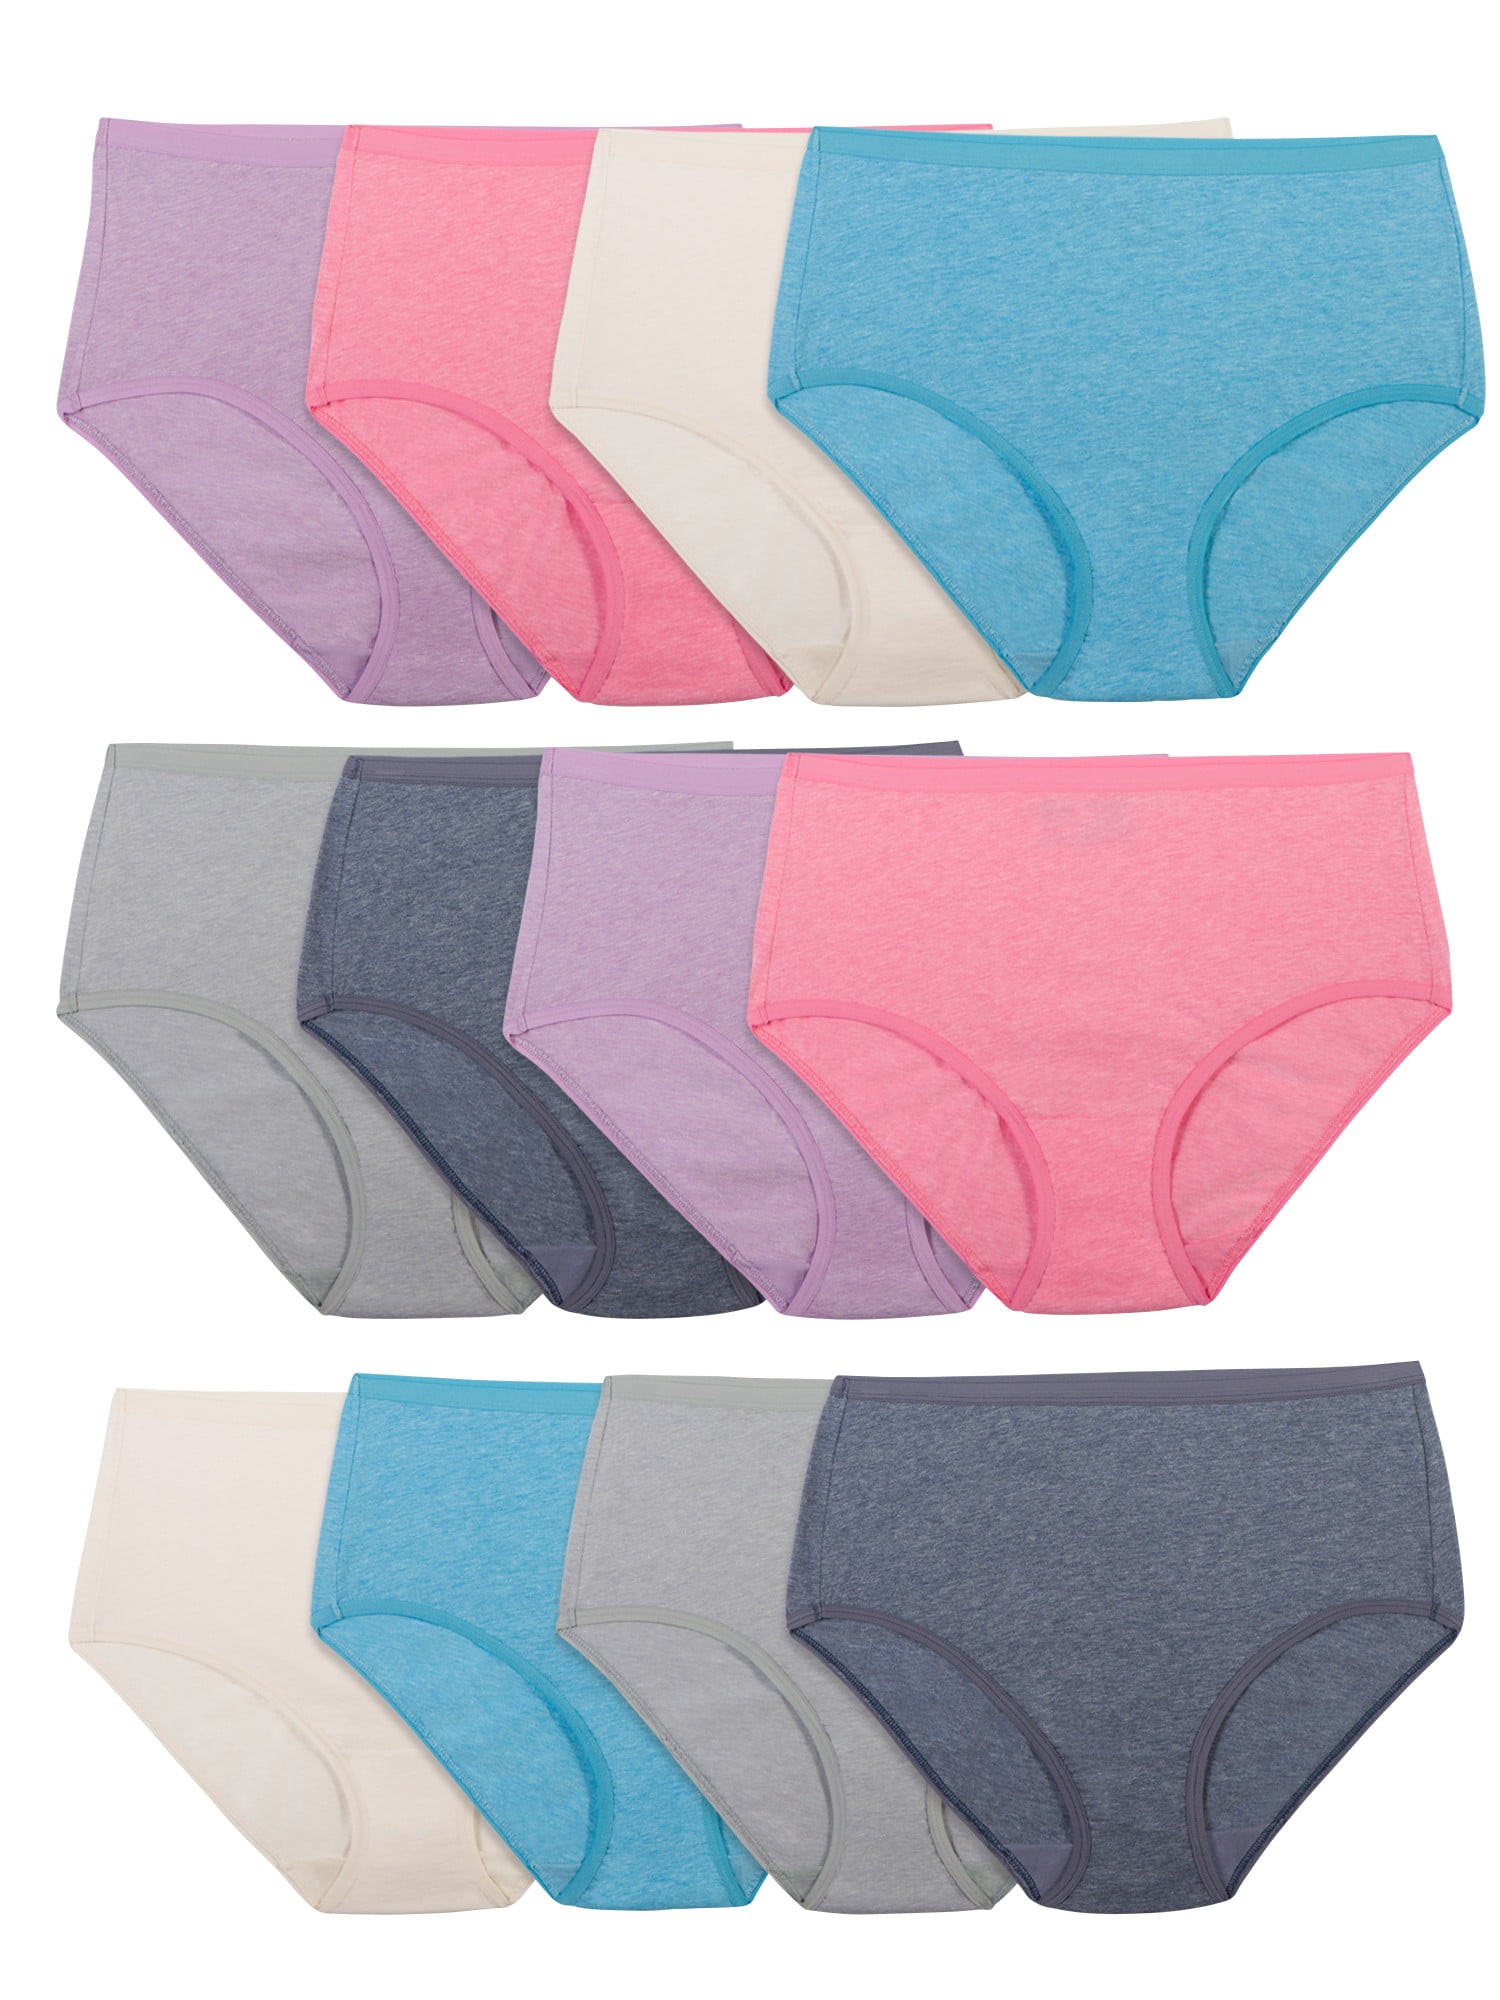 Fruit Of The Loom Women's 6pk 360 Stretch Comfort Cotton Hipster